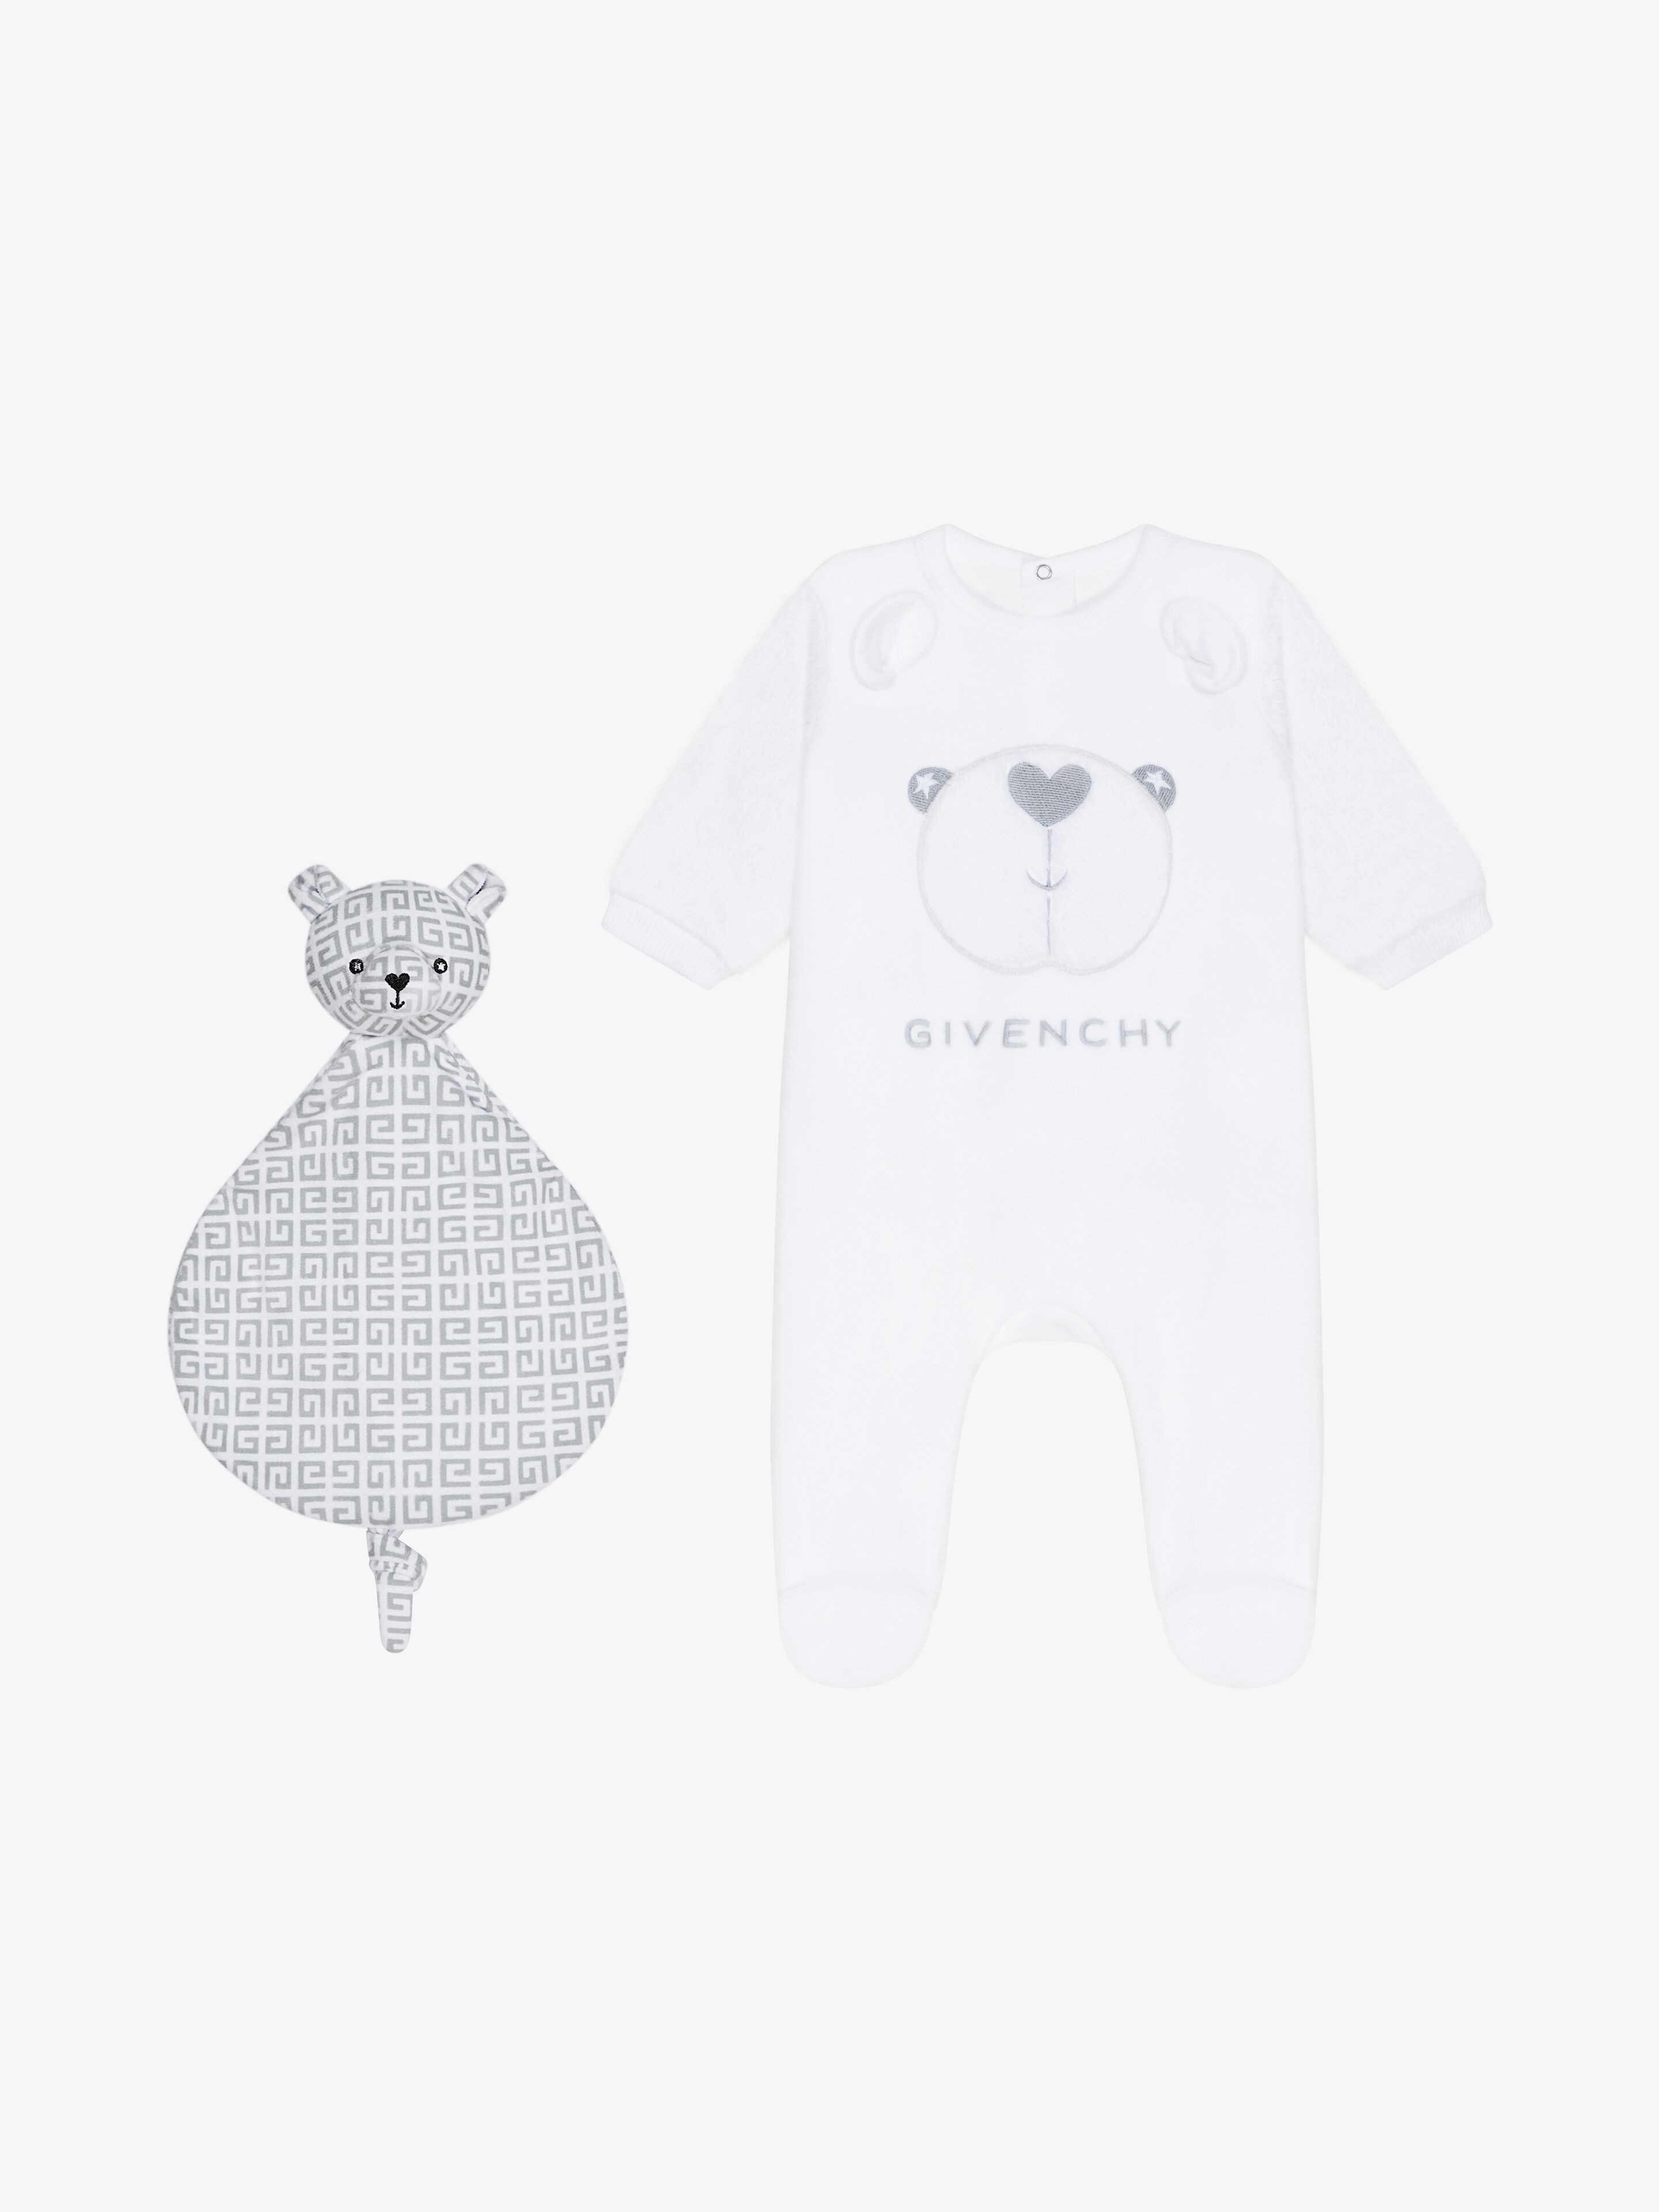 Check Out The New Givenchy Kids Frozen Collection!